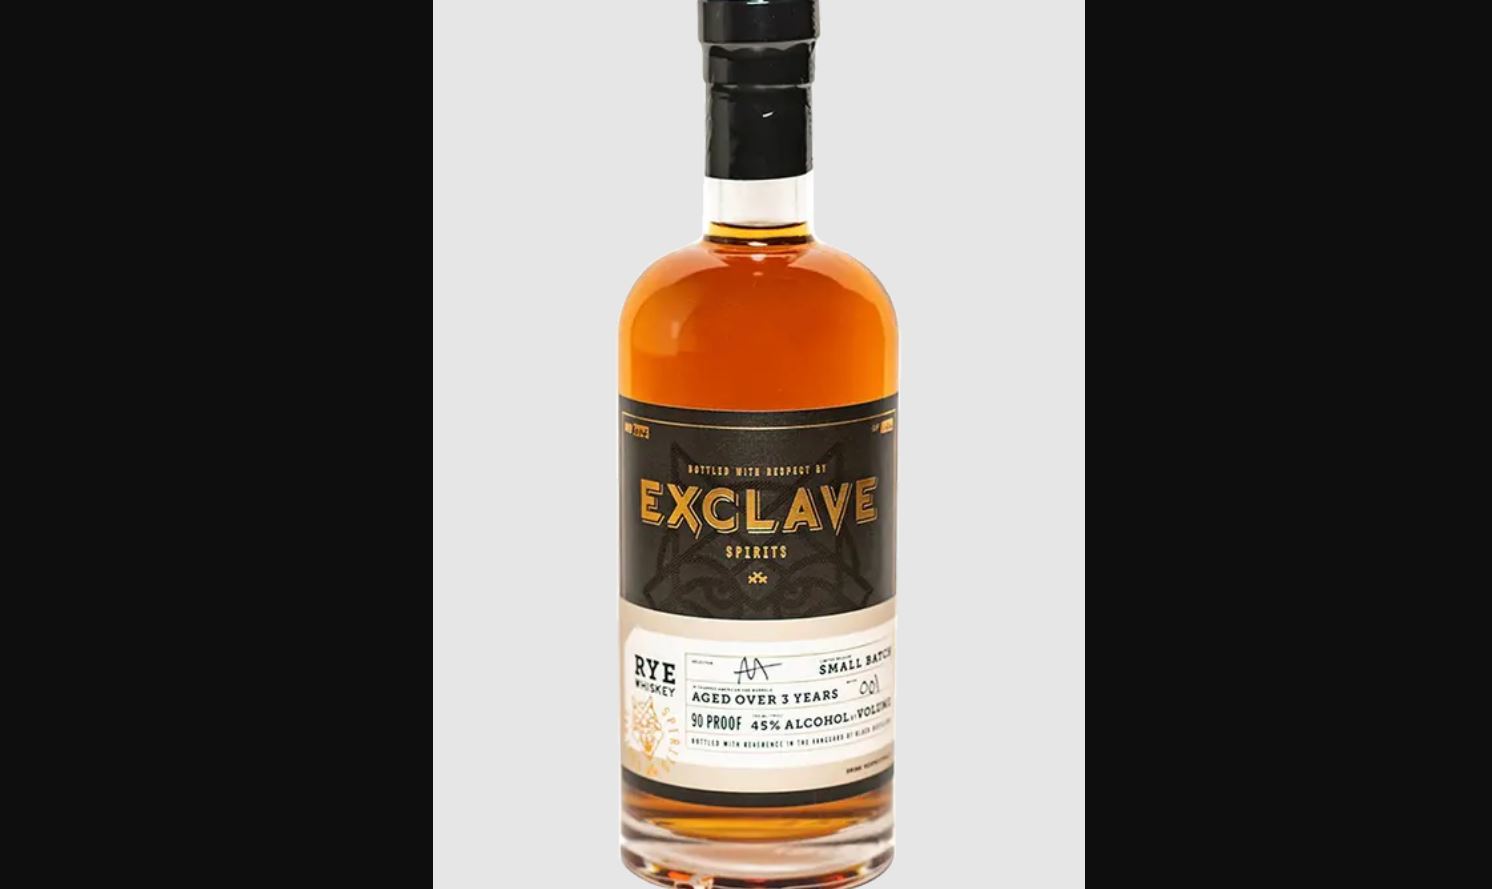 Exclave Rye